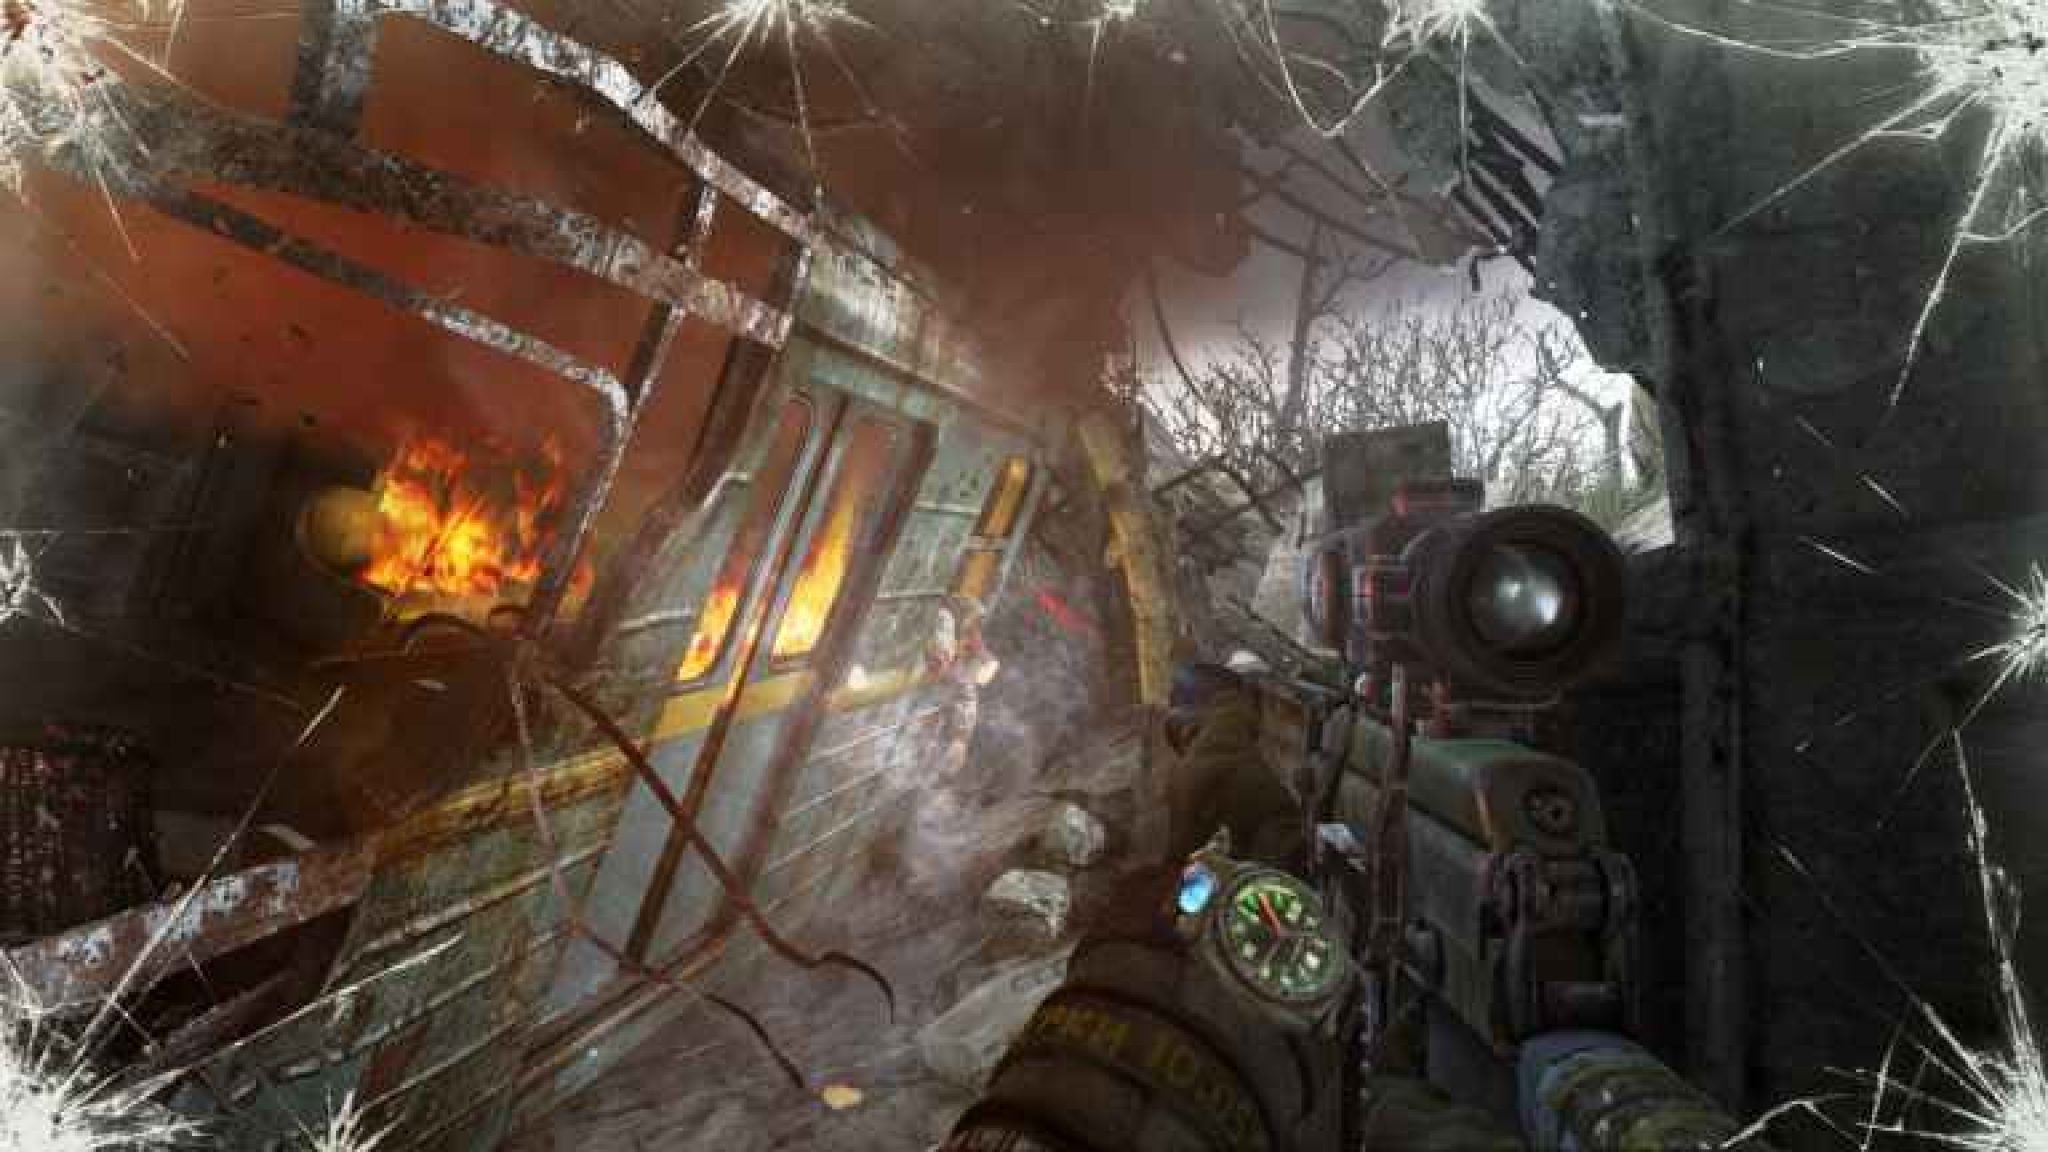 metro 2033 patch 1.2 download